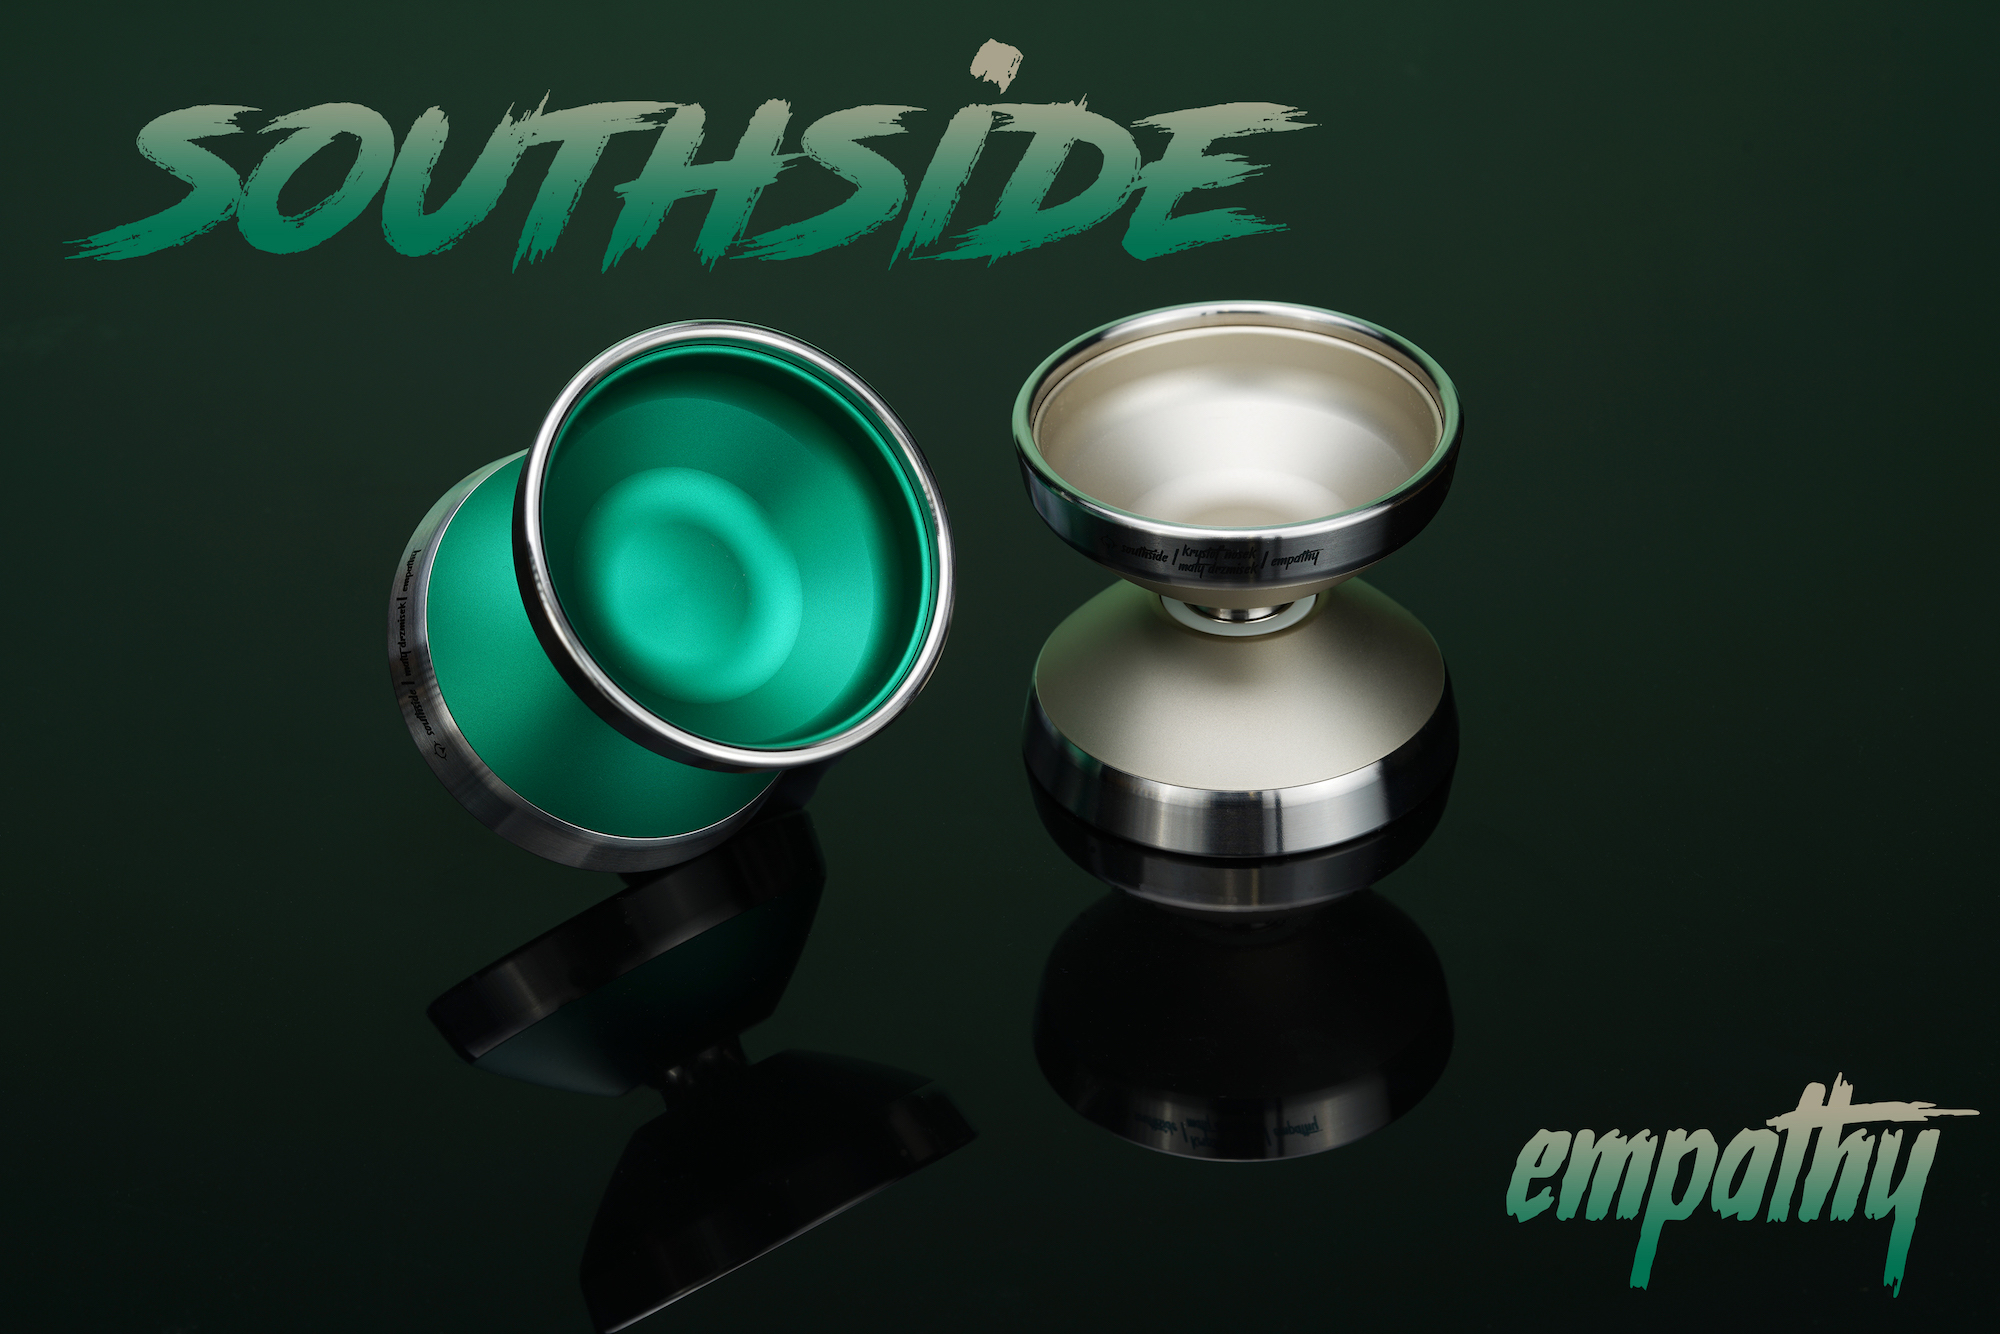 Southside by Empathy